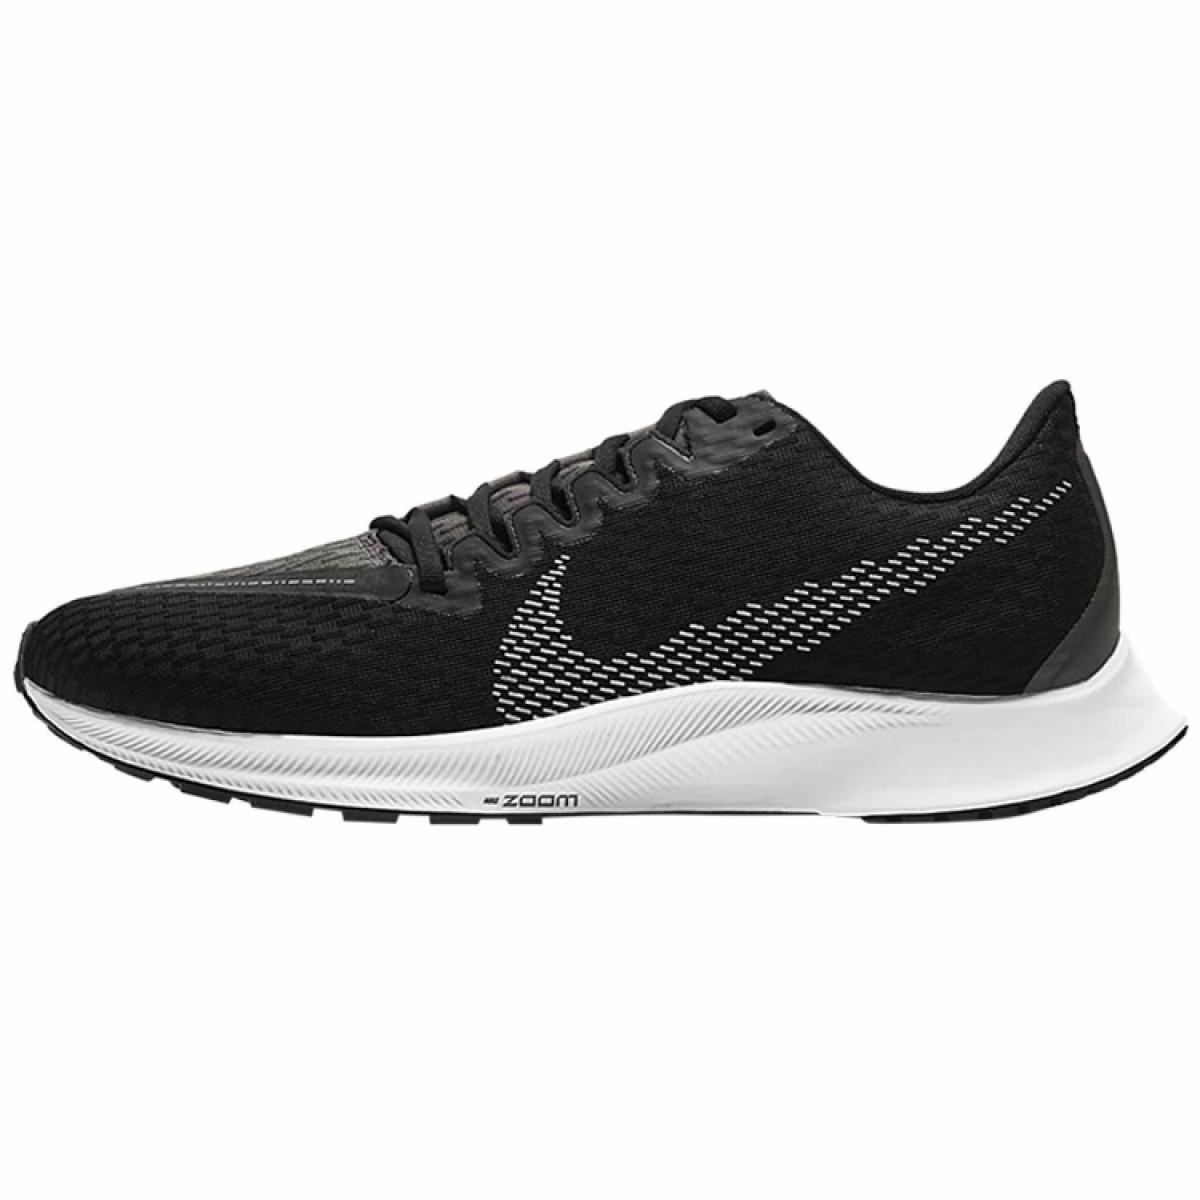 Nike Zoom Rival Fly 2 Womens CJ0509-001 Black White Grey Running Shoes Size 8.5